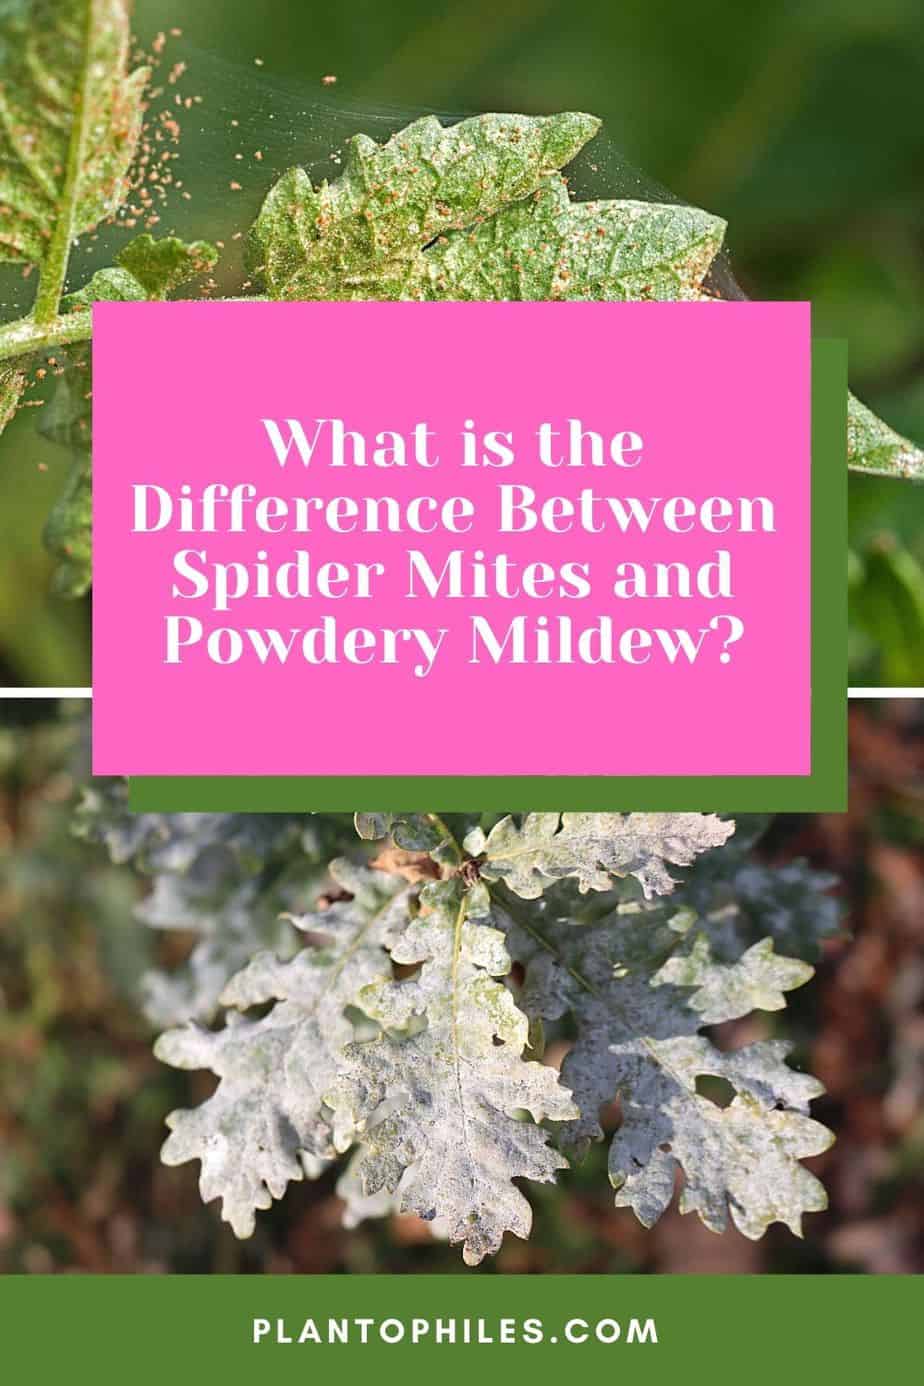 What is the Difference Between Spider Mites and Powdery Mildew